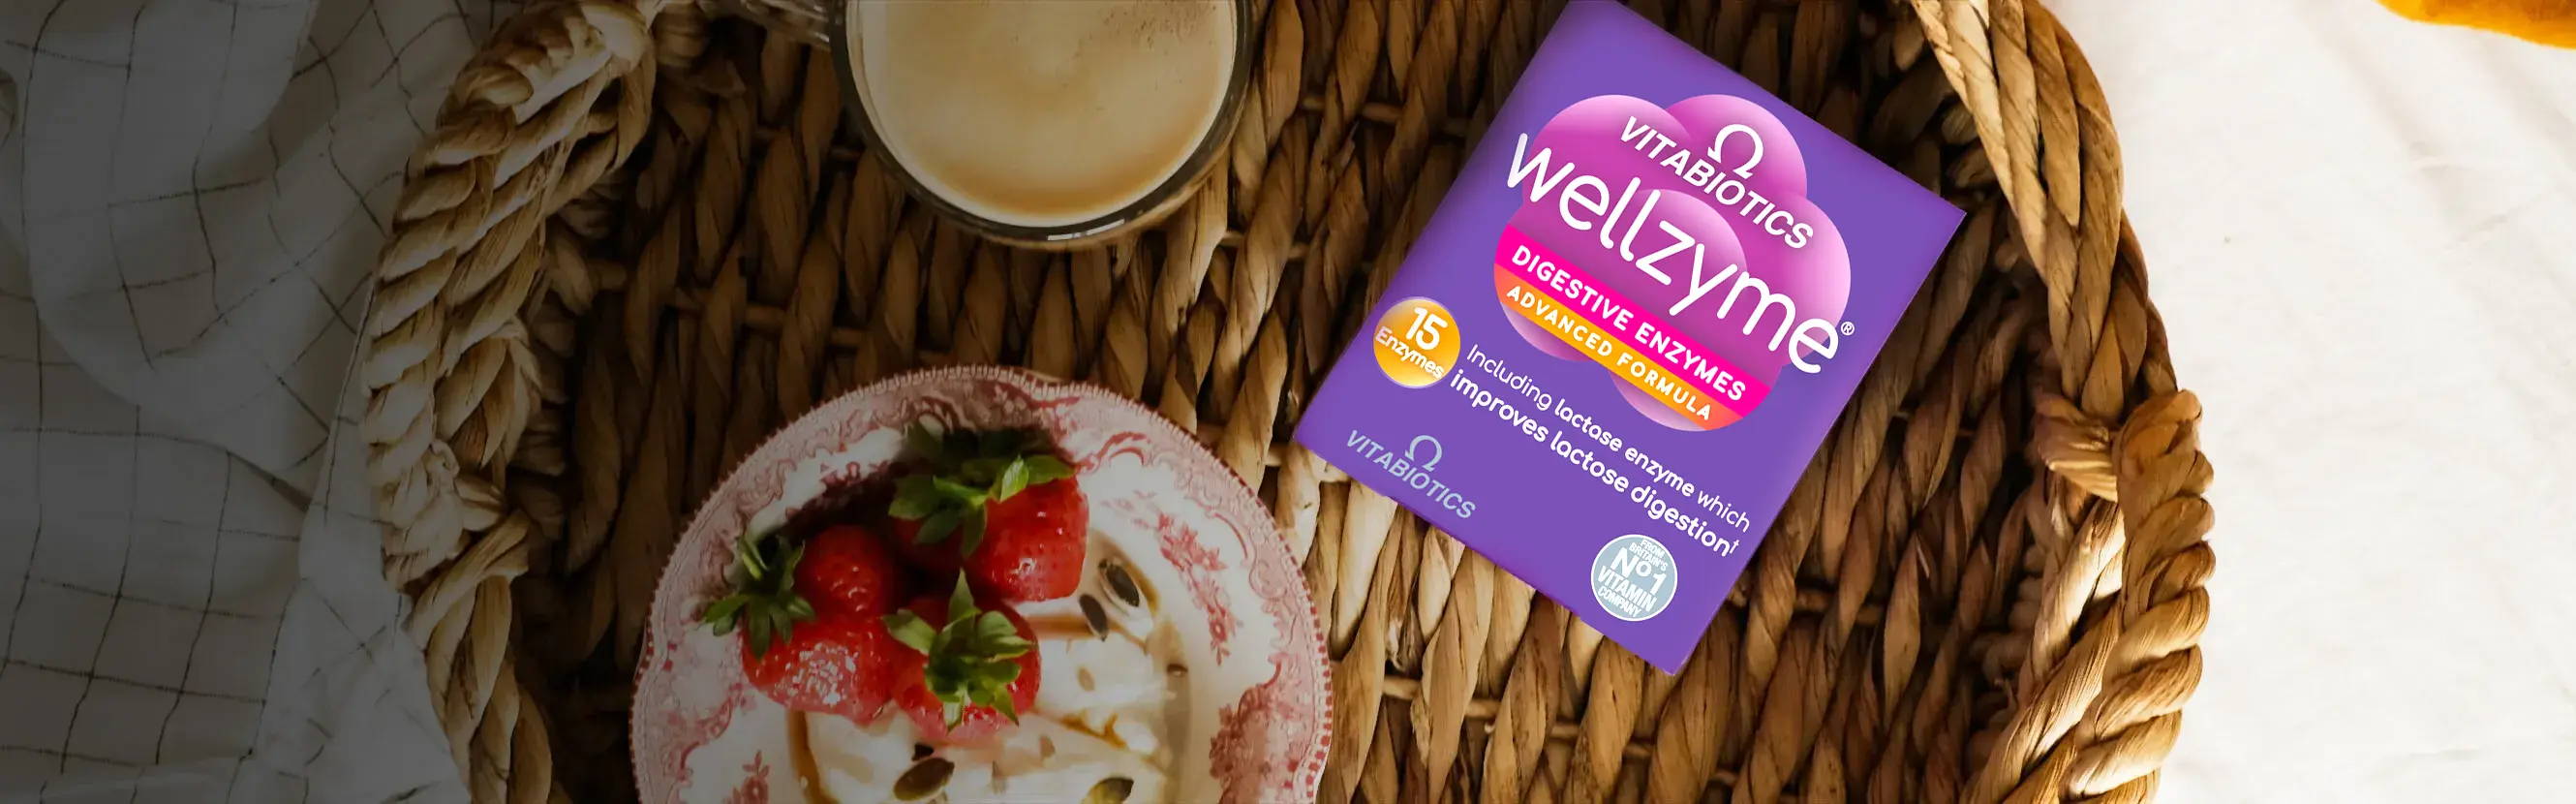  Every single day, your digestive system has a lot to get done. With Wellzyme Advanced, give it the best possible support. Just take a convenient capsule with each main meal and get the advantage of 15 active enzymes, formulated by our expert team. 